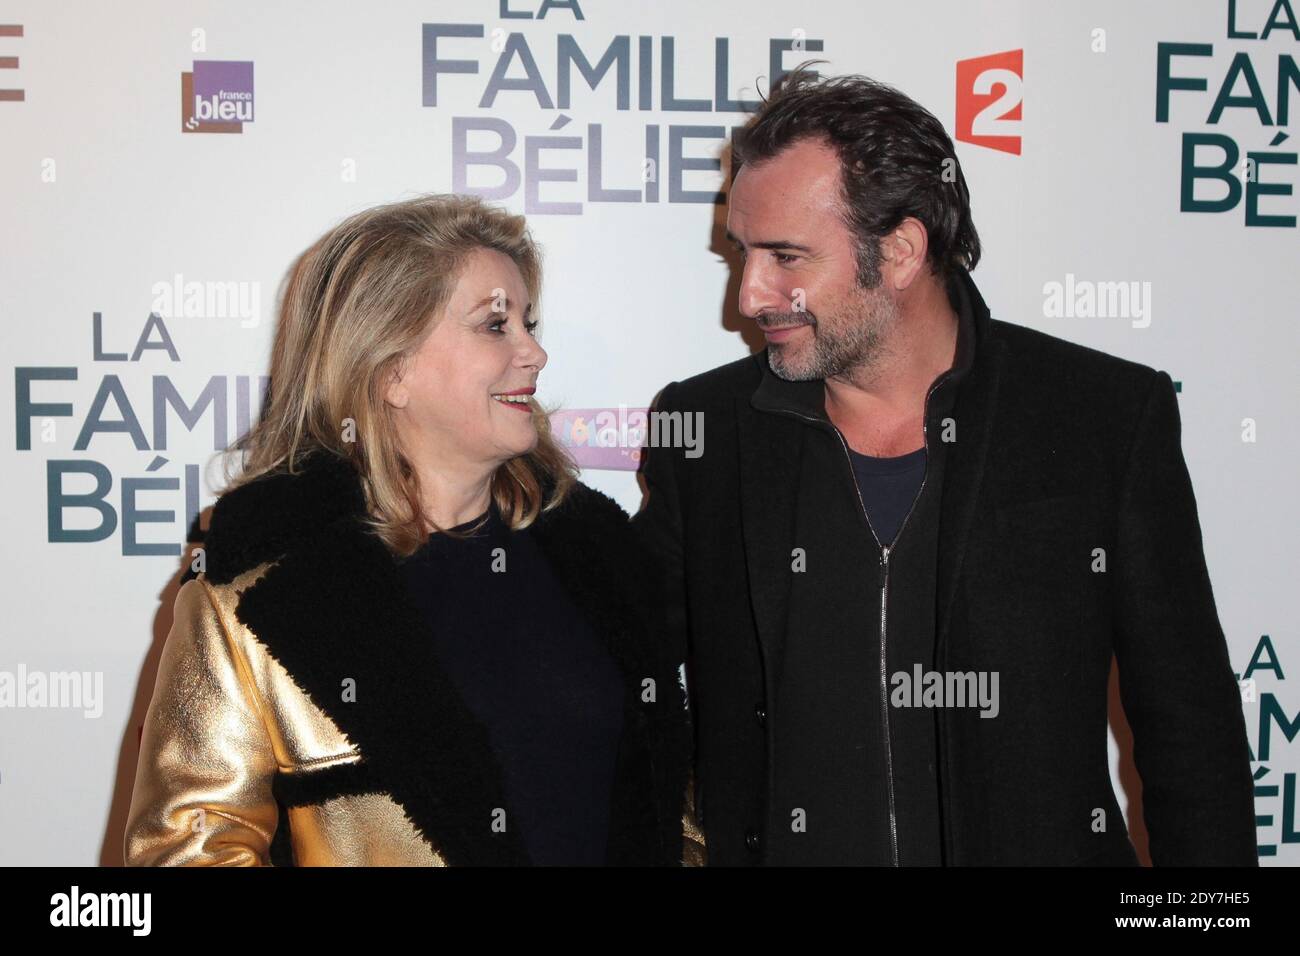 Catherine Deneuve and Jean Dujardin attending the French Premiere of the  Movie "La famille Belier" held at Cinema Le grand Rex in Paris, France, on  December 09, 2014. Photo by Audrey Poree/ABACAPRESS.COM